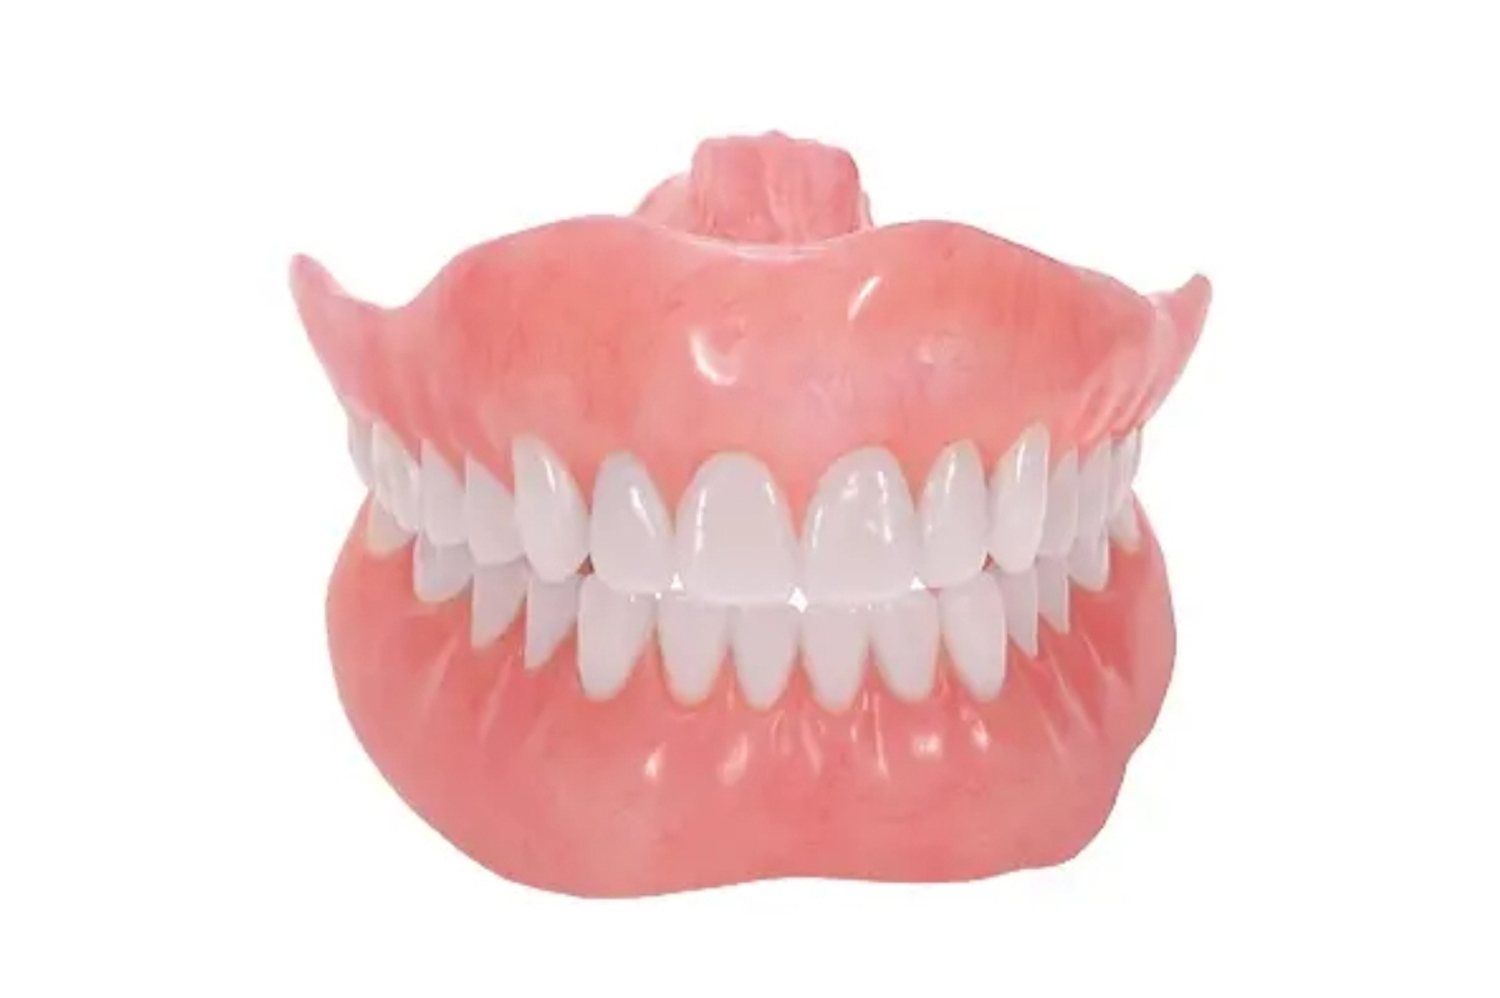 Top denture treatment & services in pune